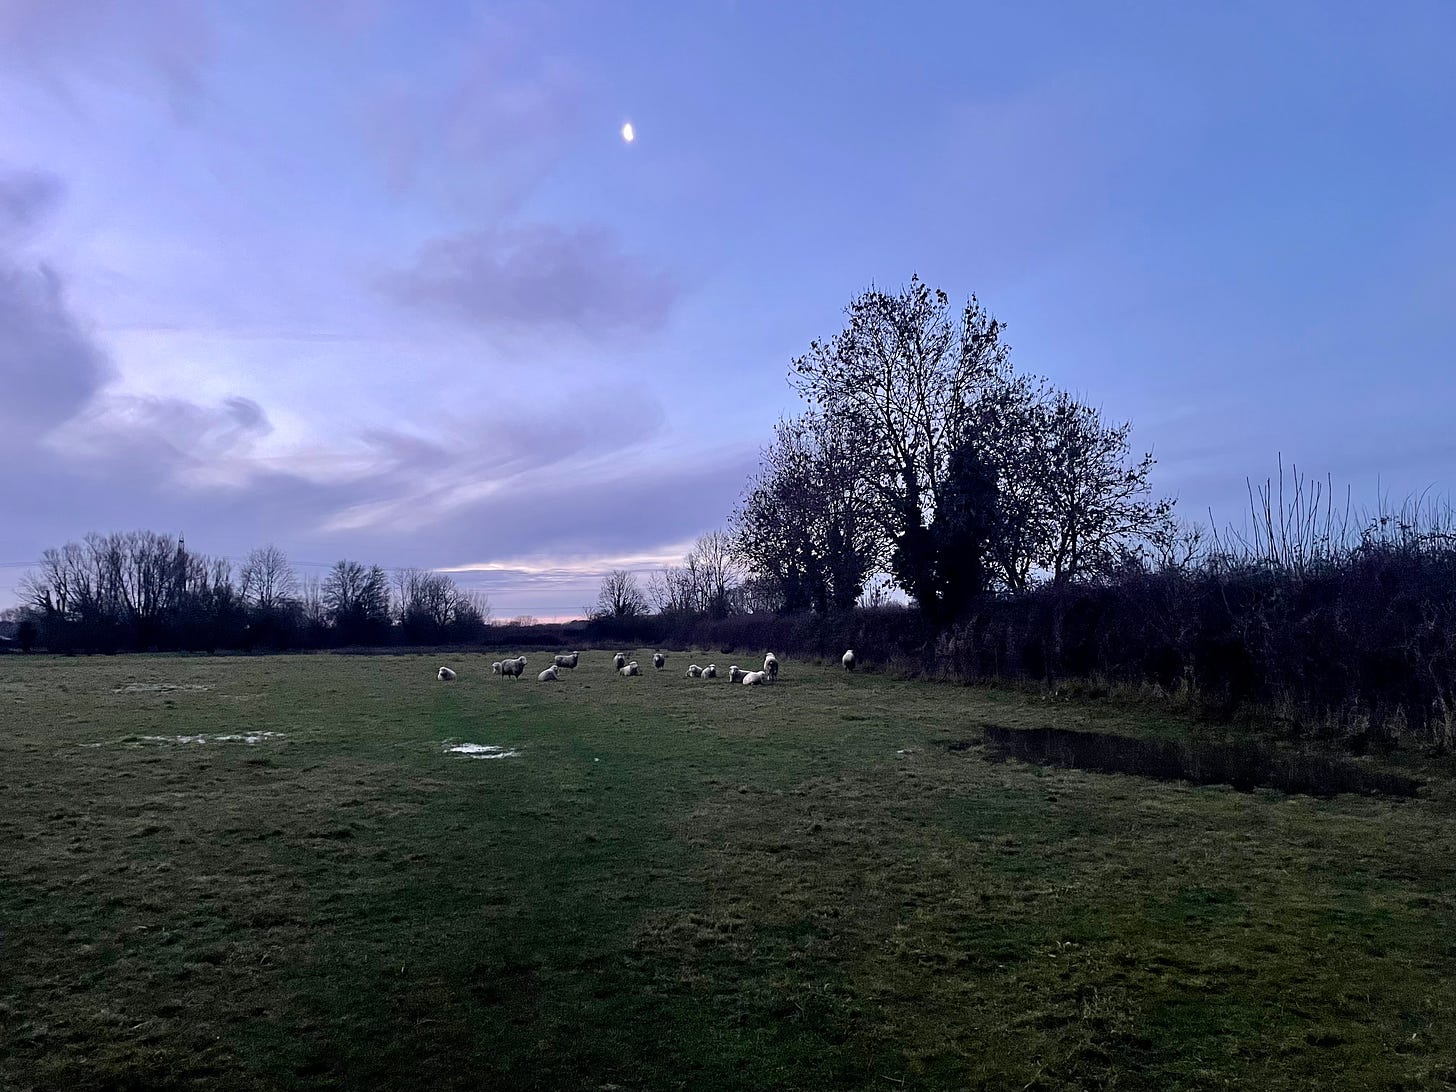 Sheep in a field with the morning moon overhead